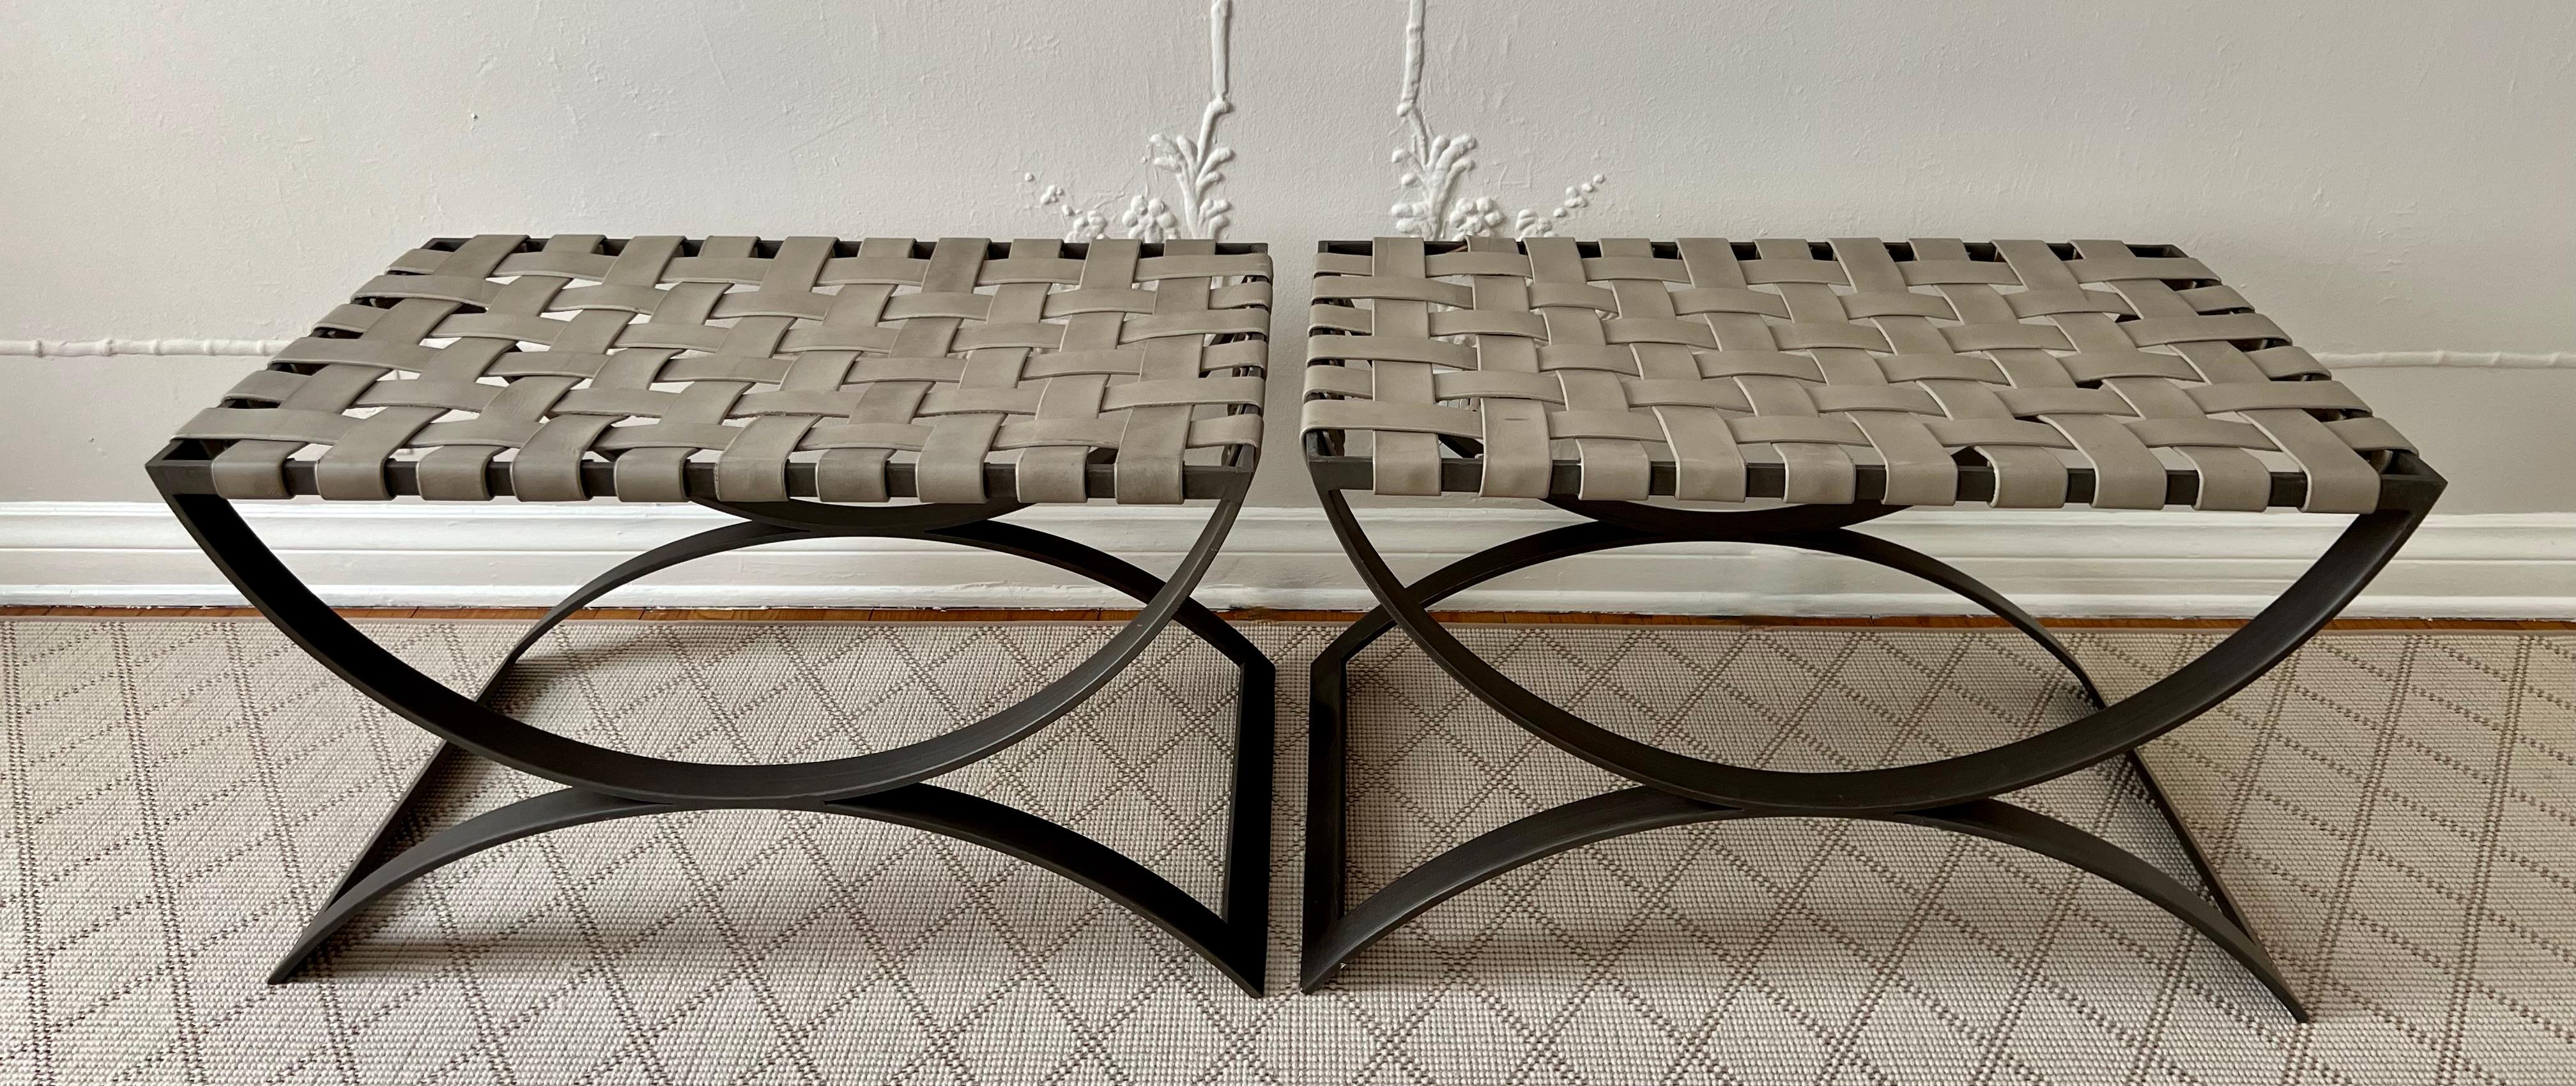 A very nice pair of modern Wrought Iron Frame benches with taupe leather woven seats. The pair are very handsome and sturdy. 

A compliment to many rooms - could be slid under a console table and pulled out for extra guests, used as ottomans,